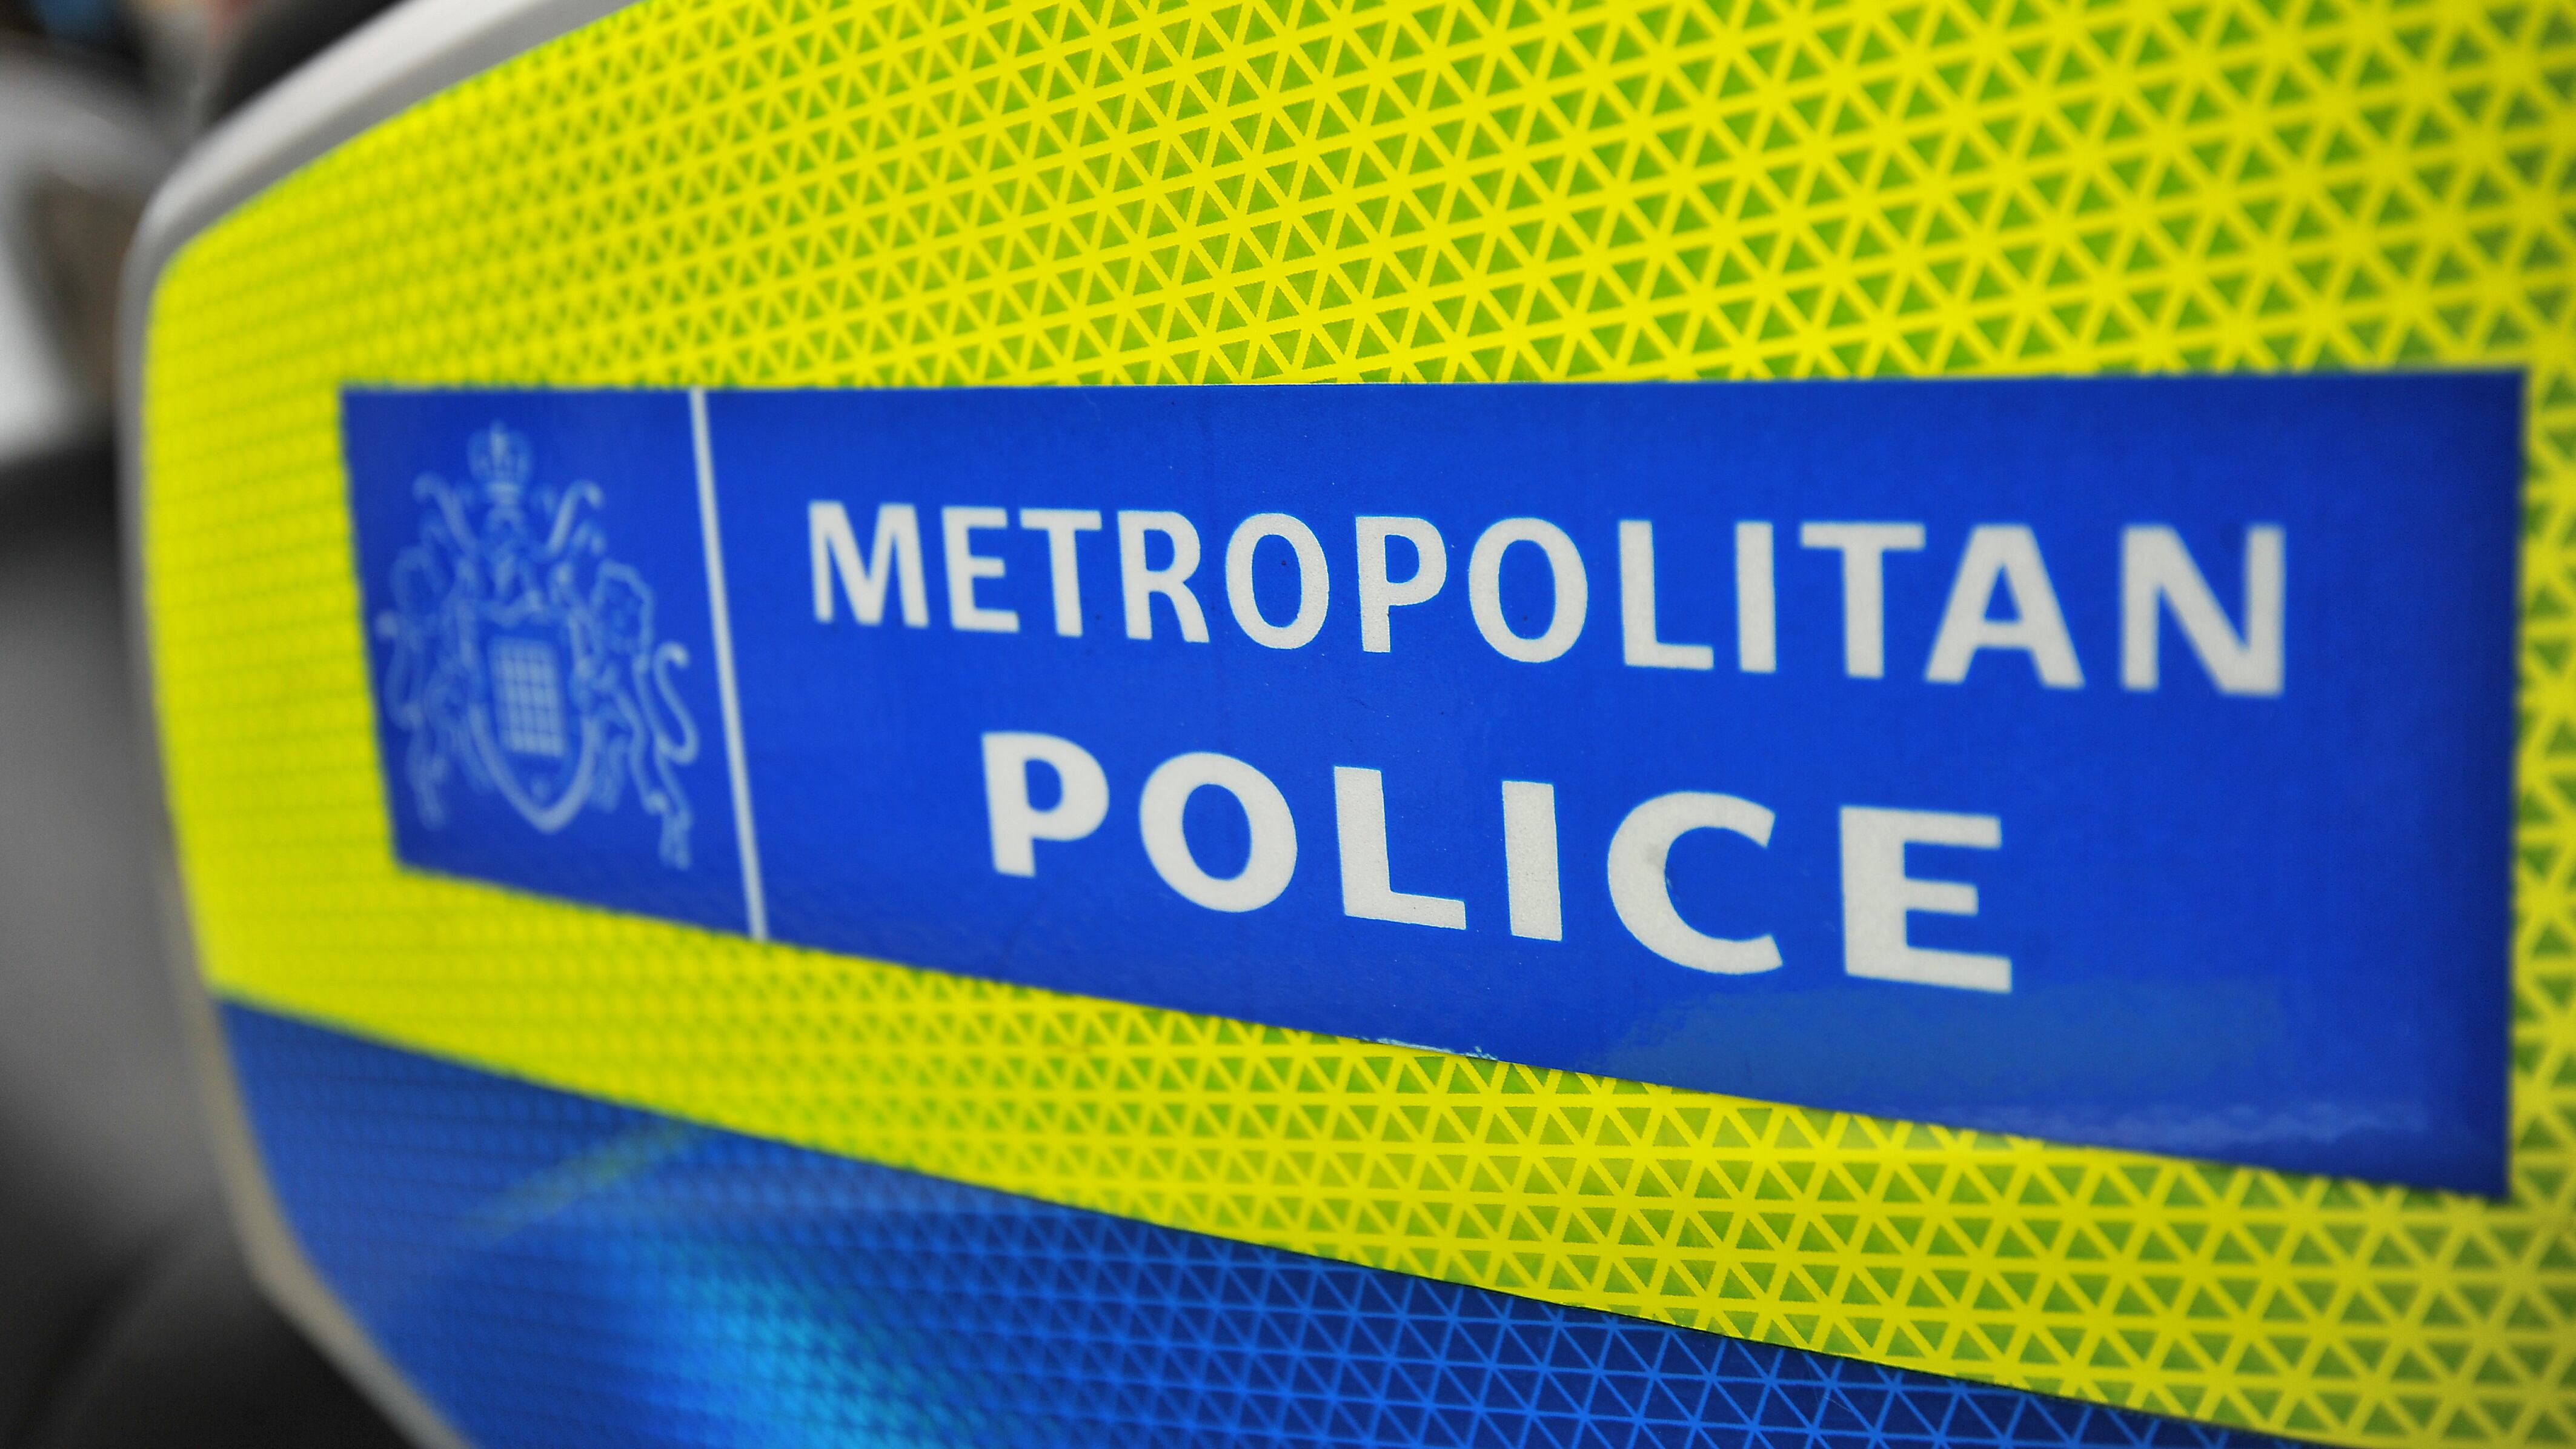 A Metropolitan Police officer has been charged with misconduct in public office